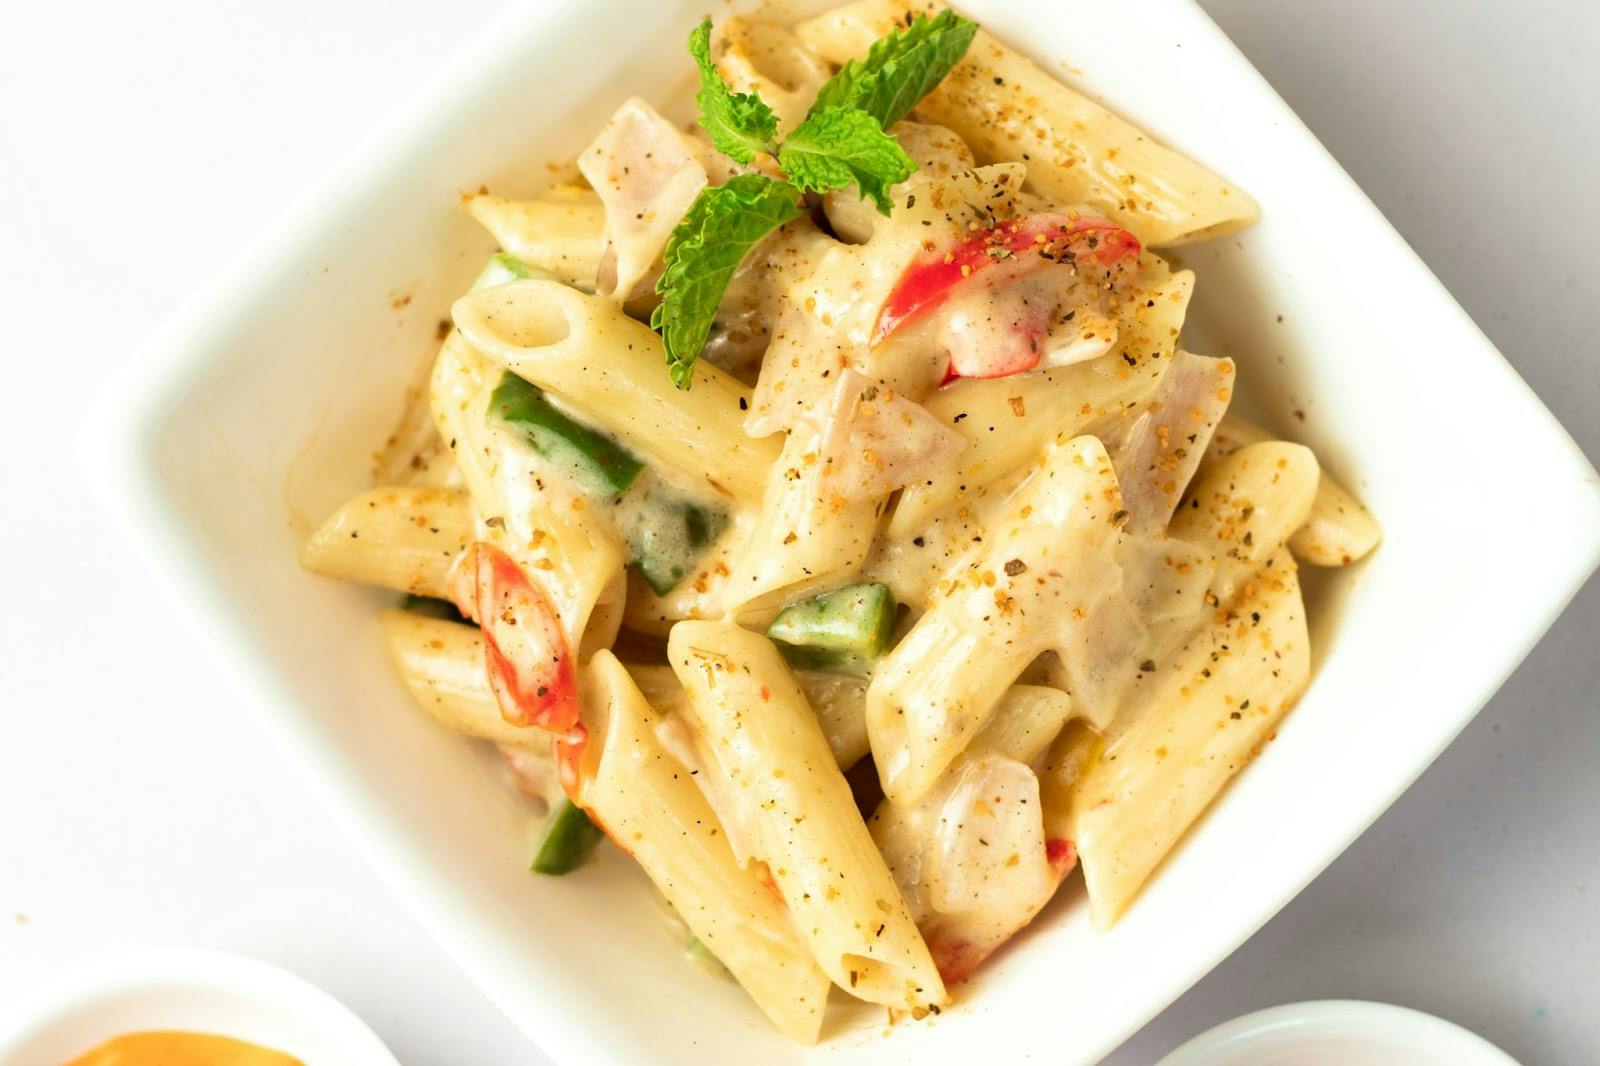 Image of a penne pasta dish made with alternative milk